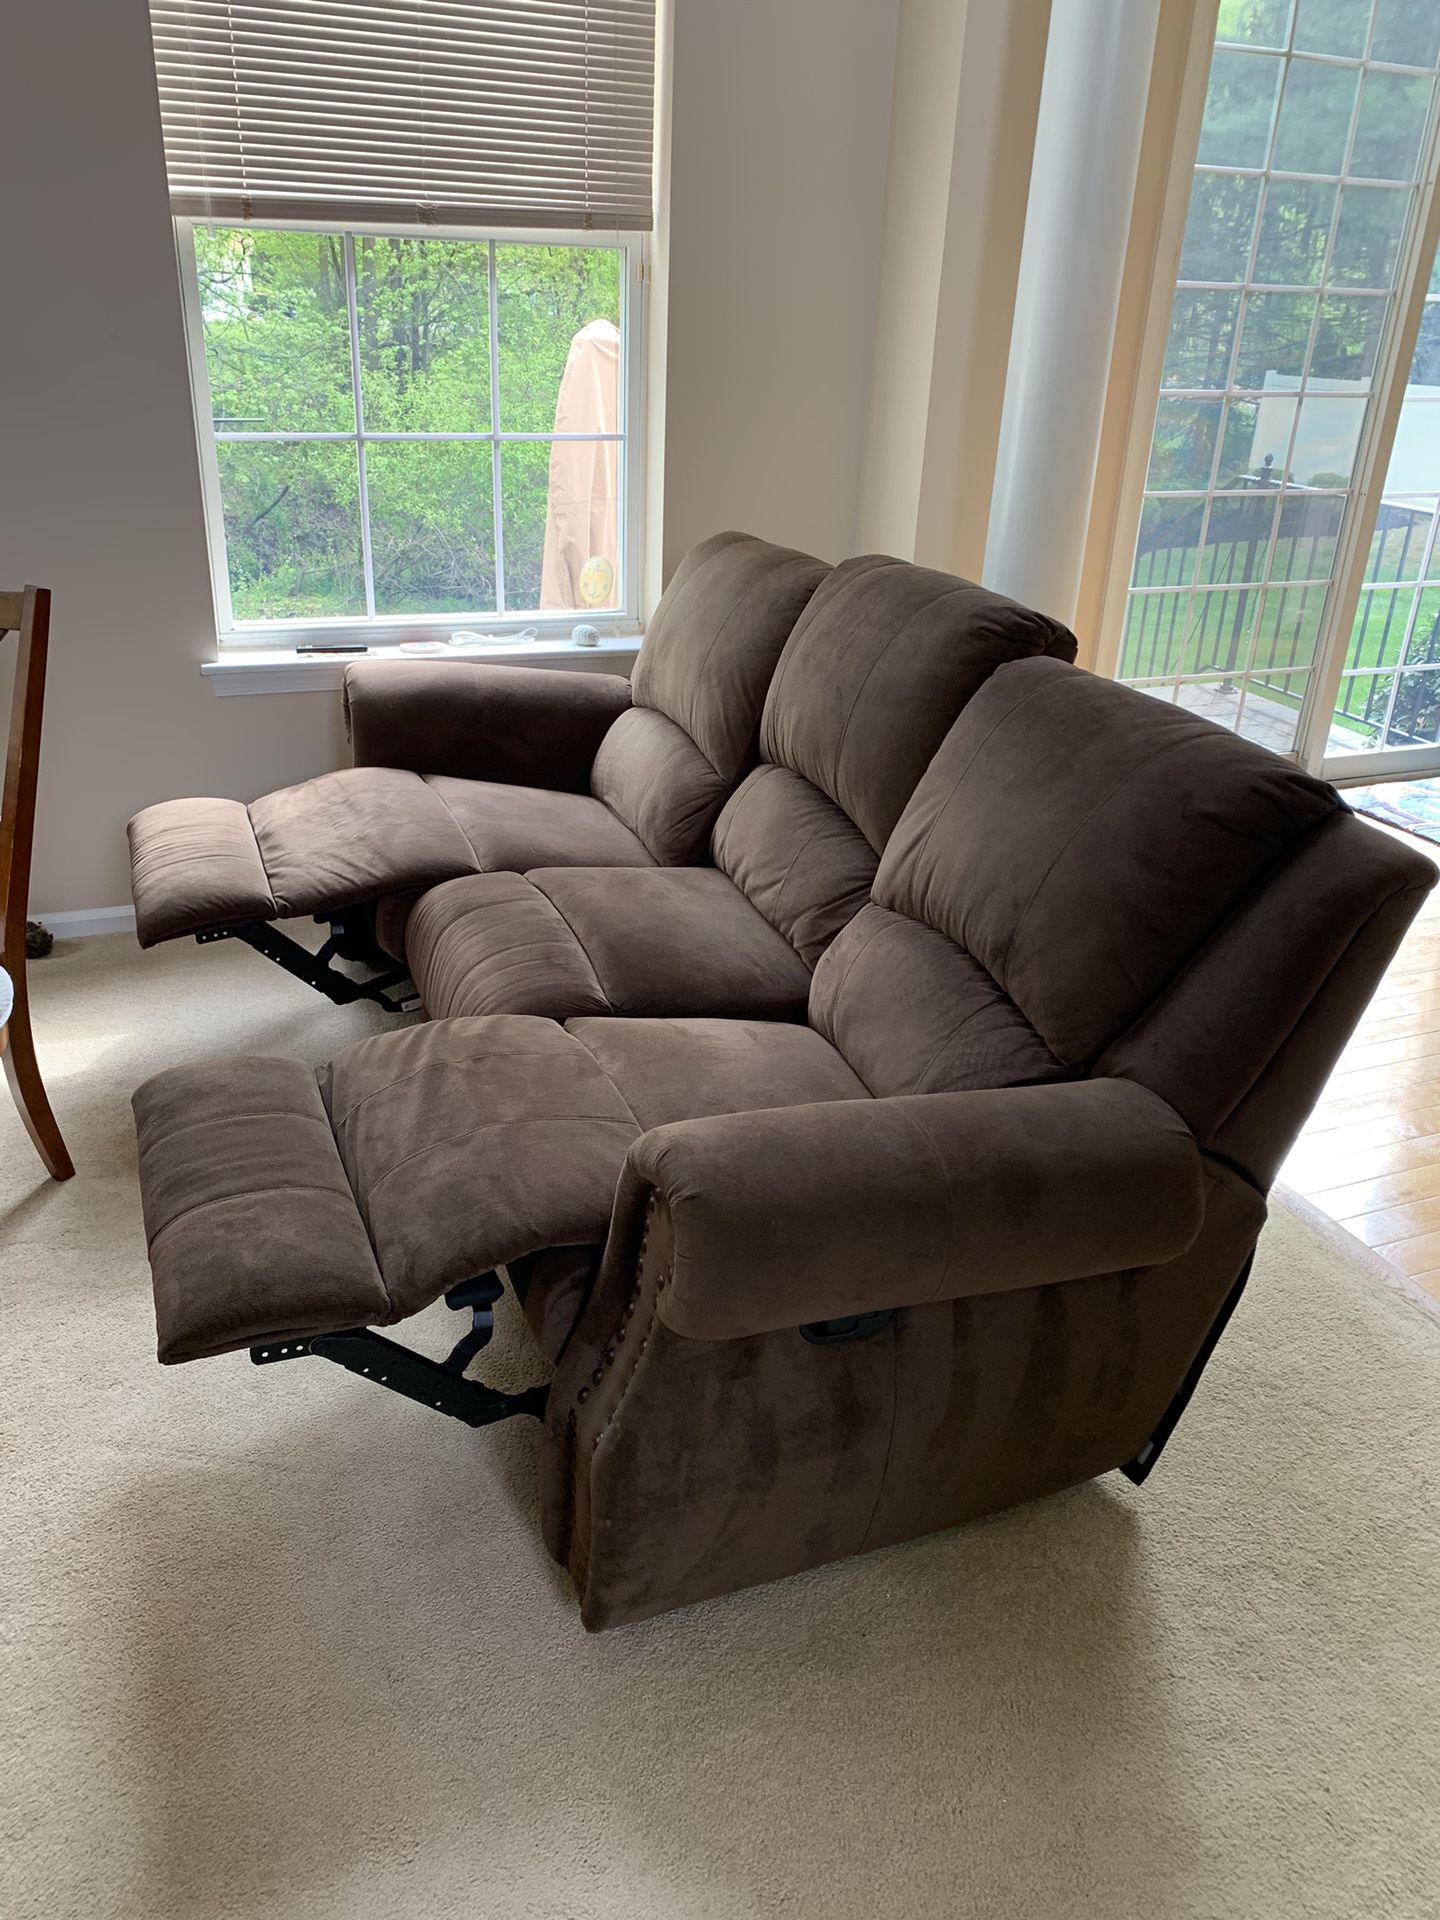 Sofa w/matching Love Seat. Both Recliners 